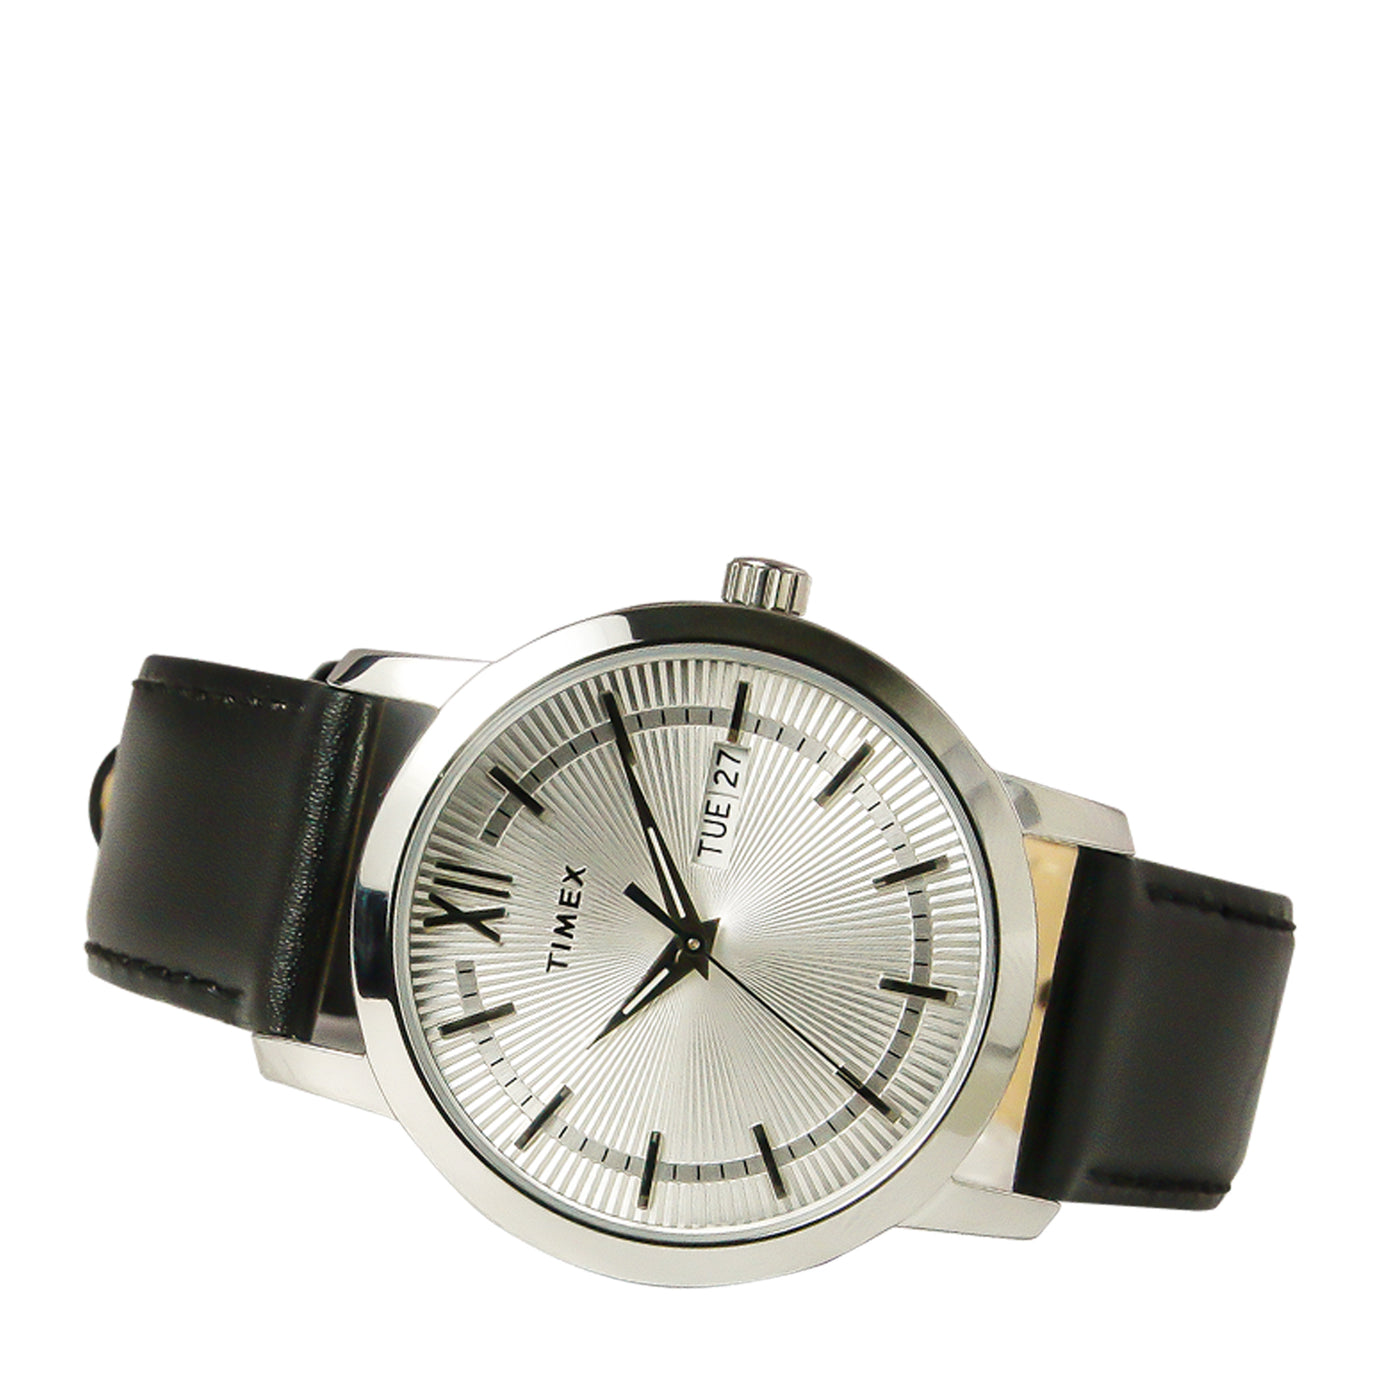 Timex Benedict Day-Date 39mm Leather Band